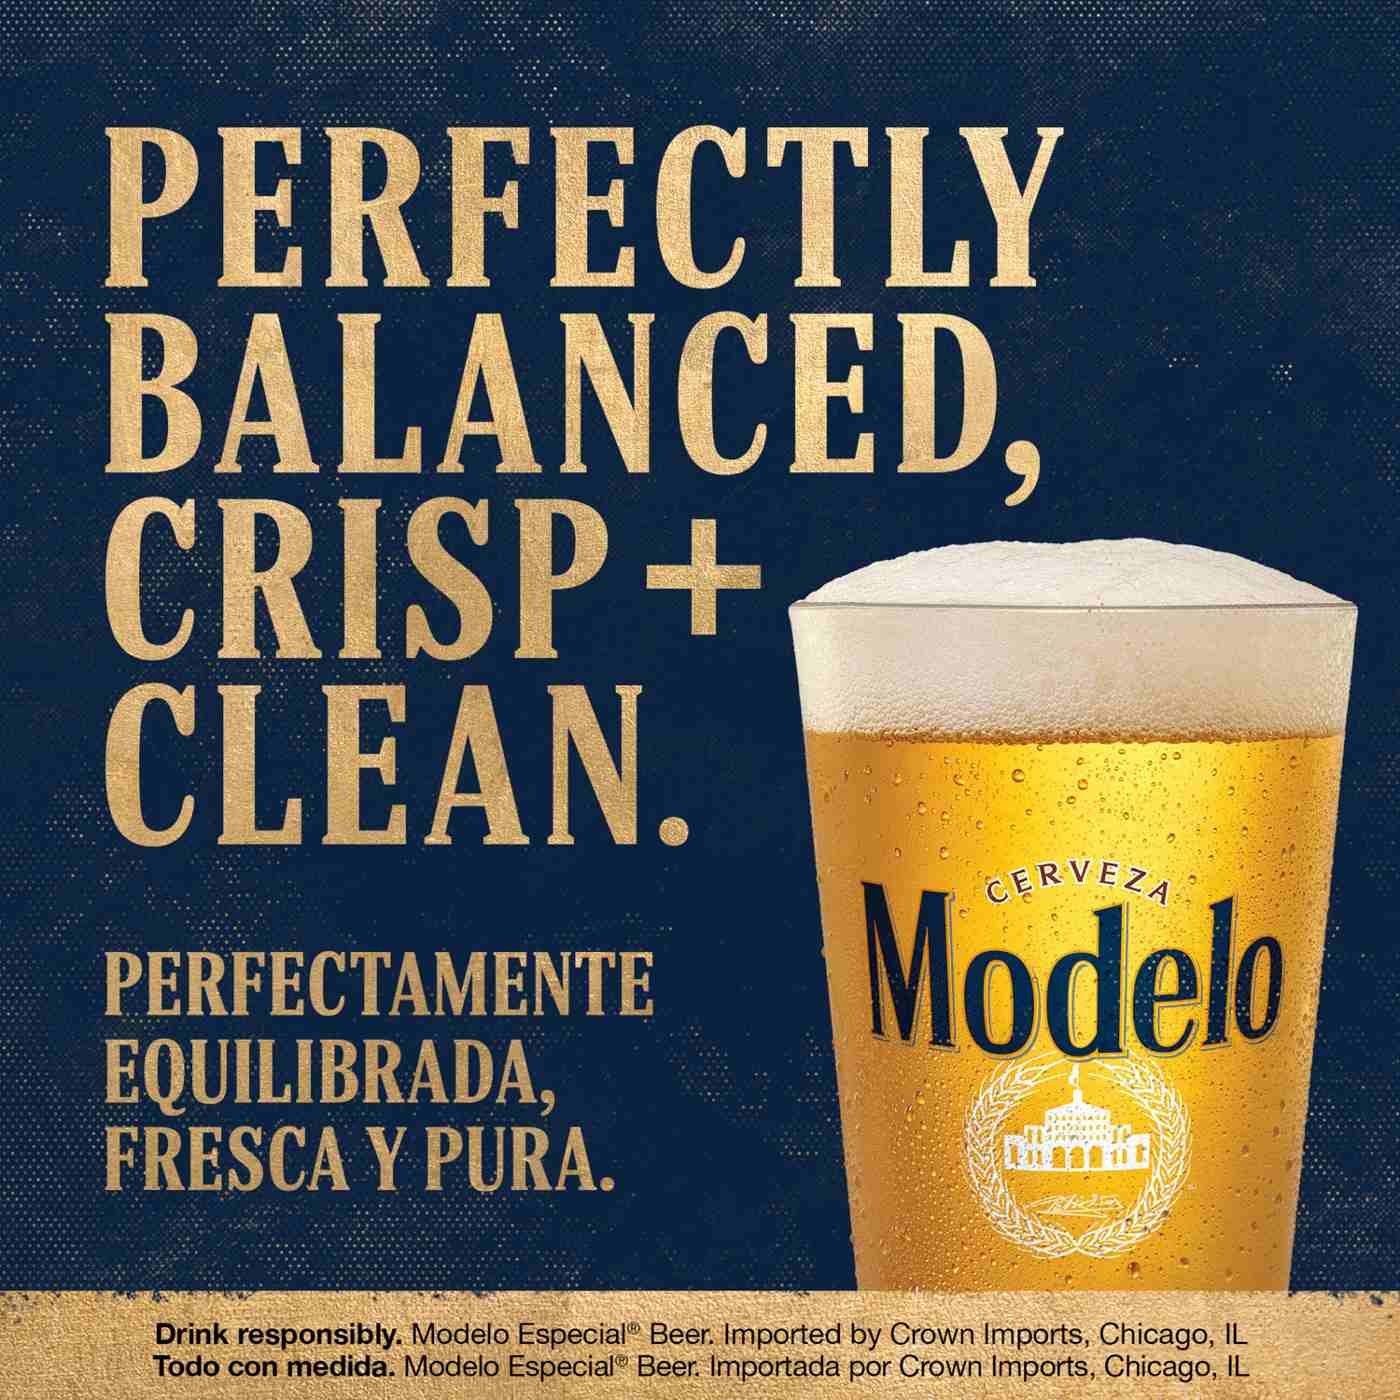 Modelo Especial Mexican Lager Import Beer 12 oz Bottles, 24 pk; image 5 of 10